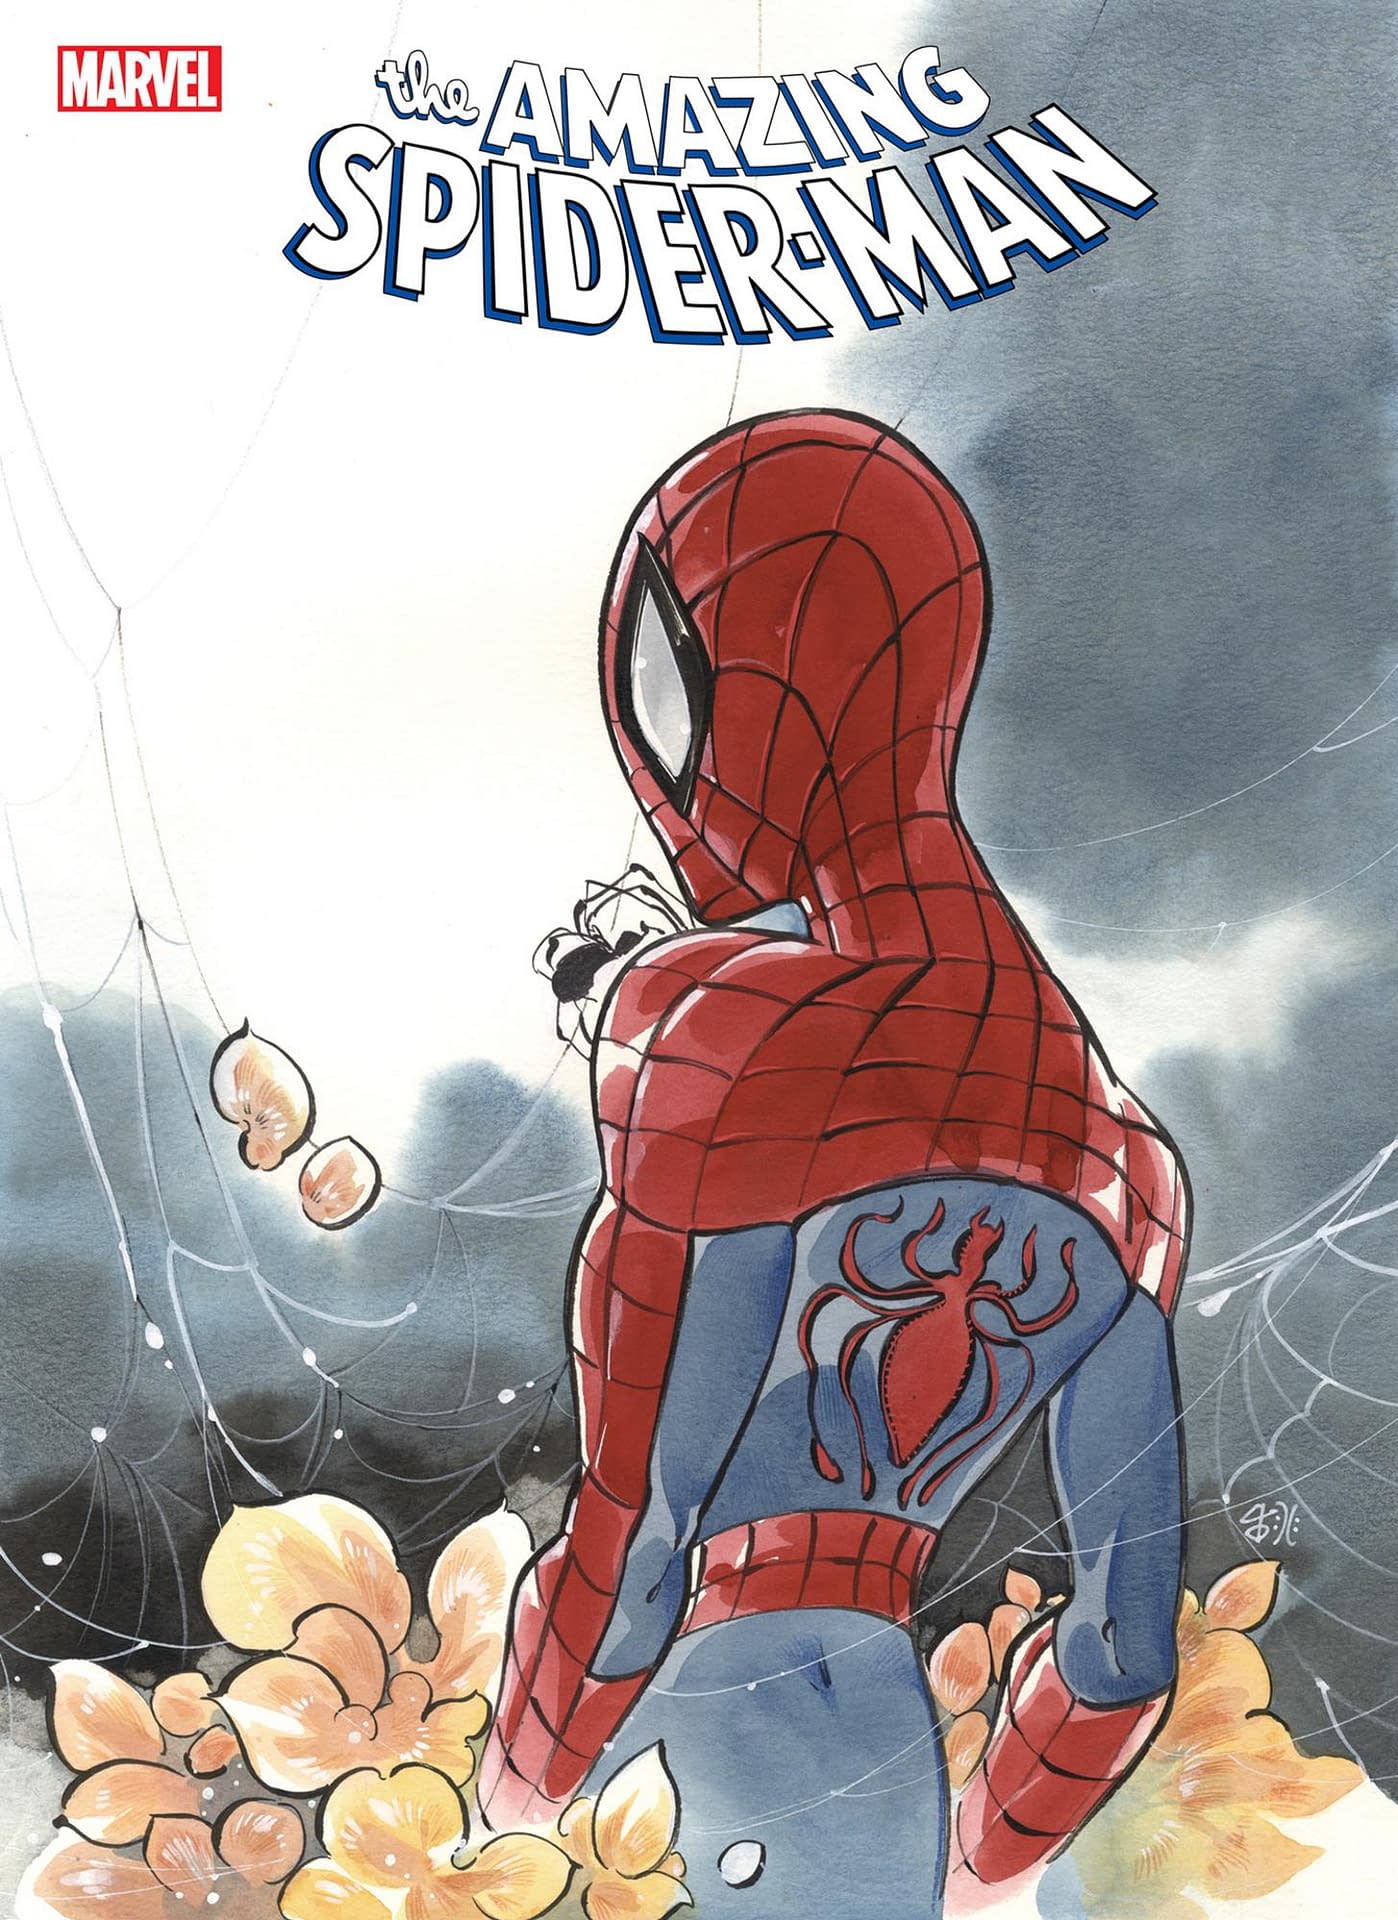 Amazing Spider-Man #47 Preview: Clone Chaos Continues